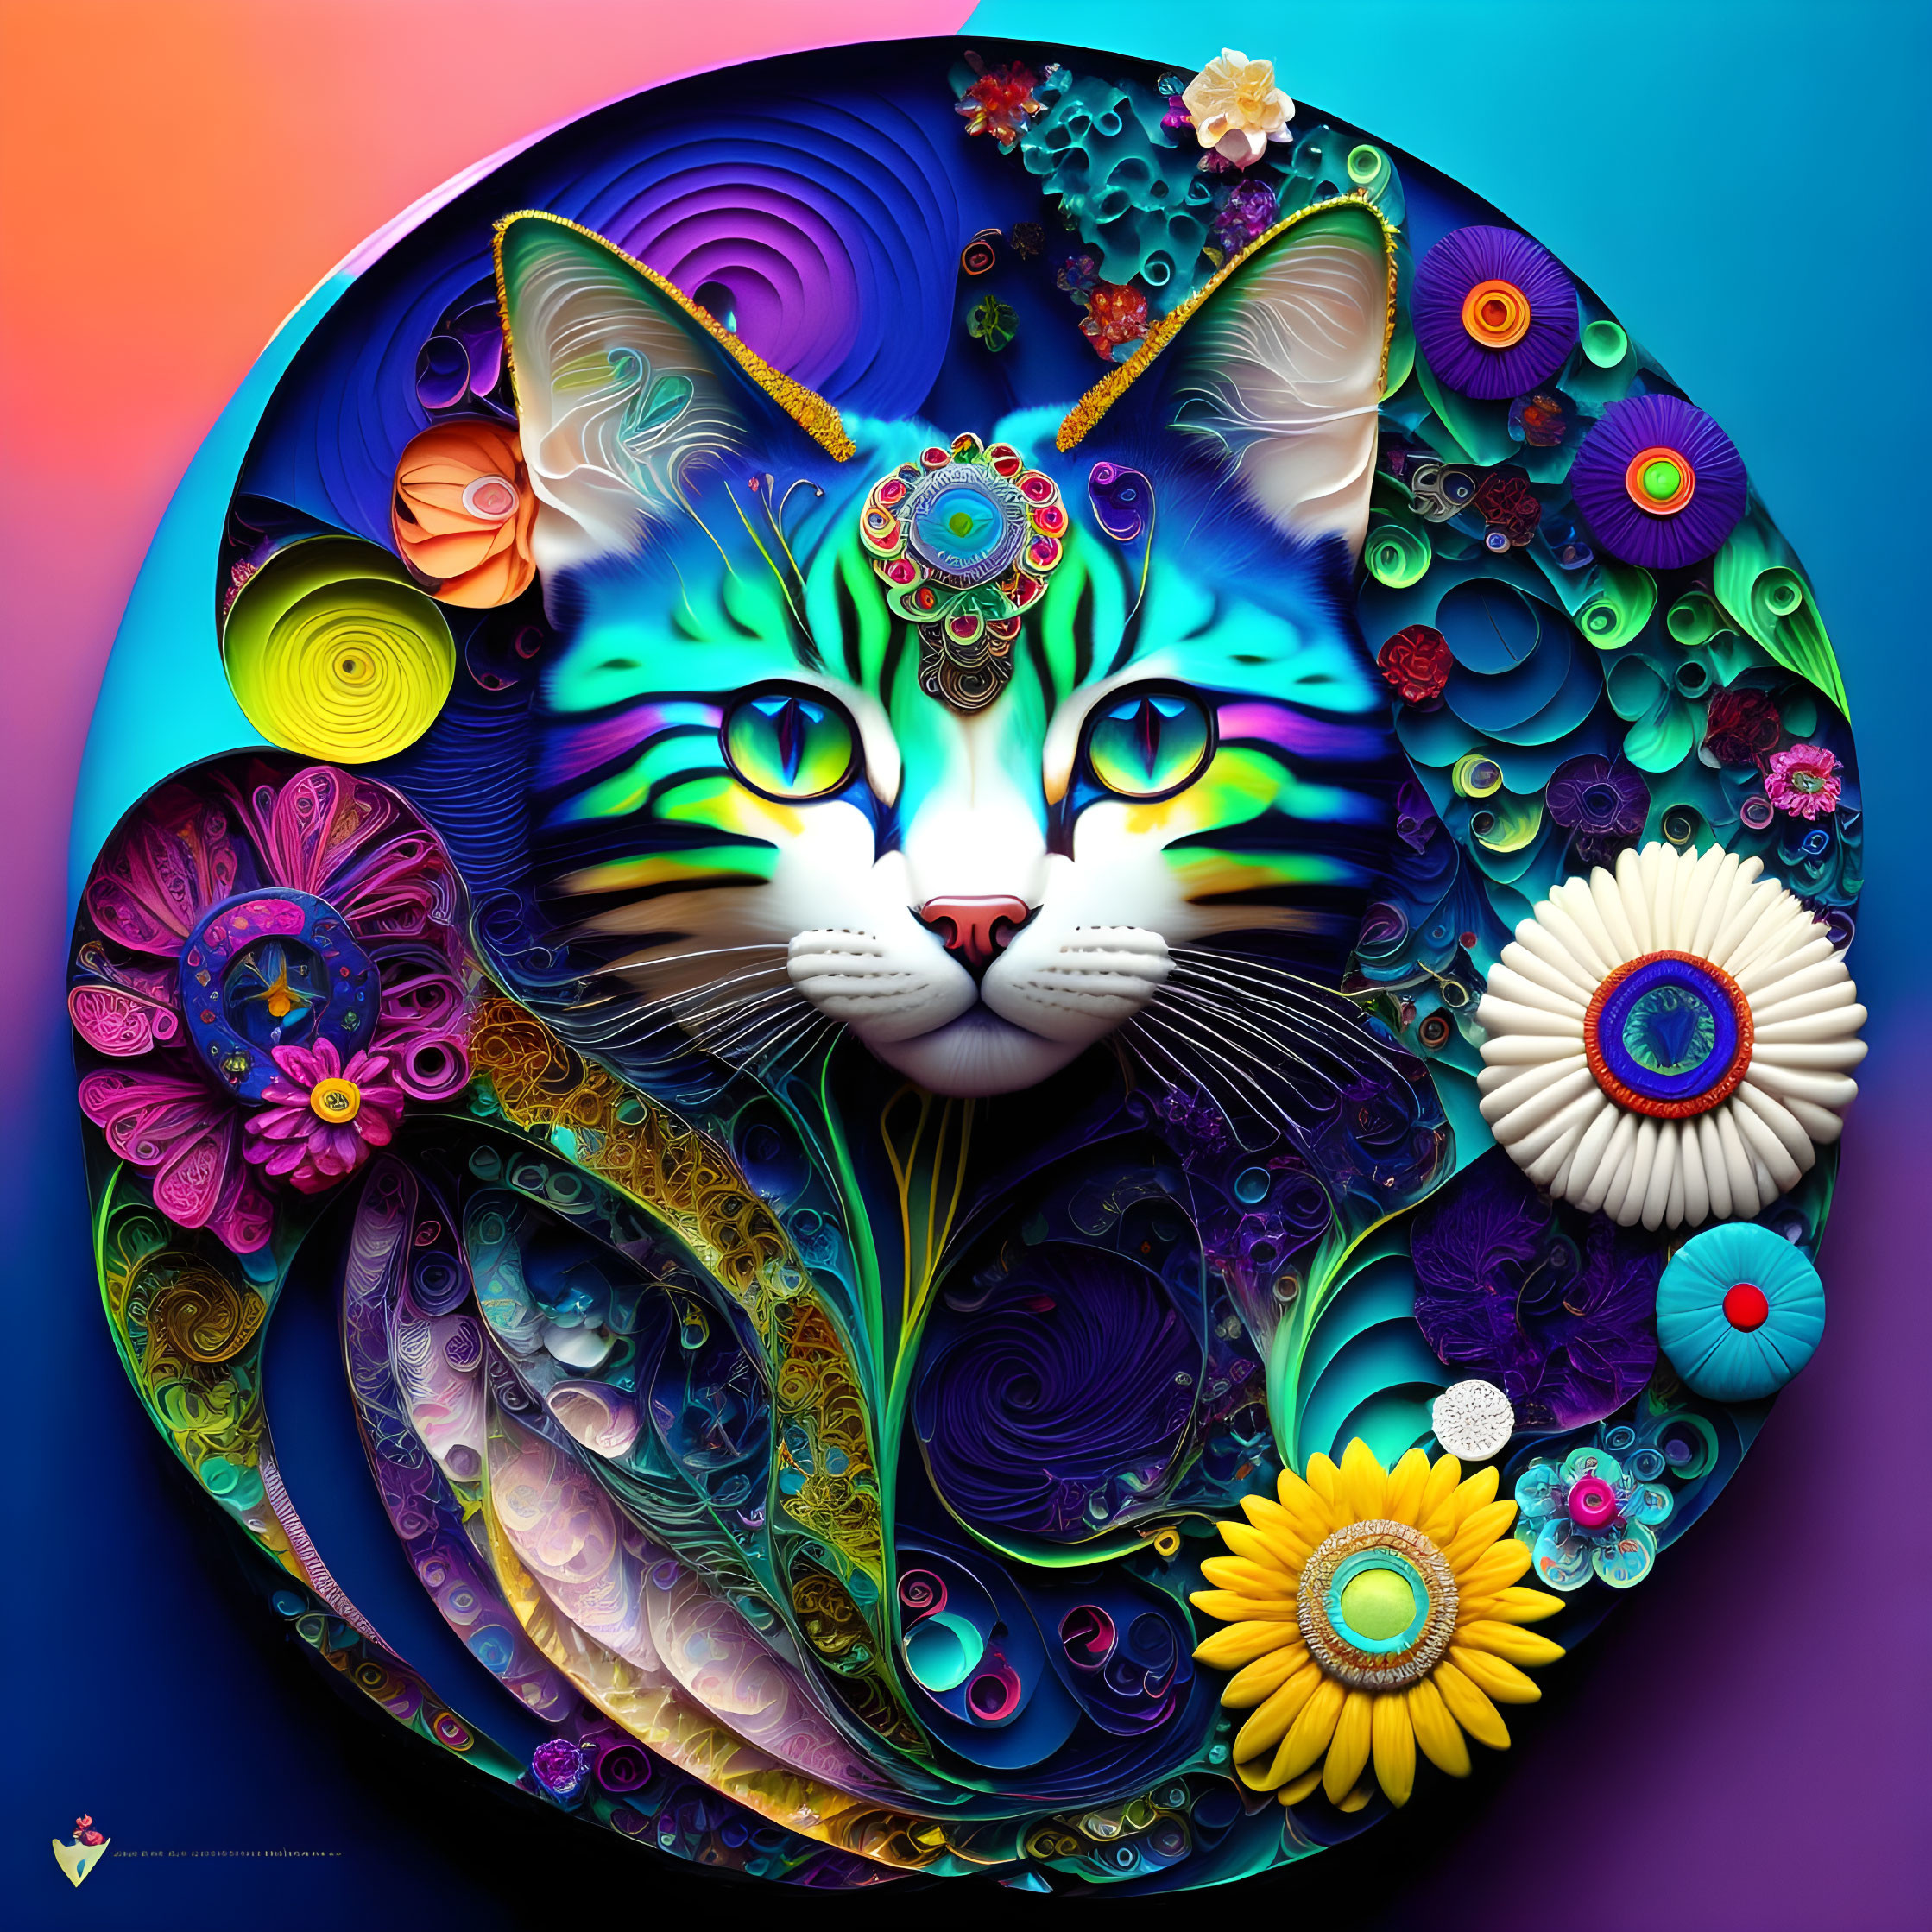 Colorful Circular Artwork: Stylized Cat Surrounded by Floral Patterns